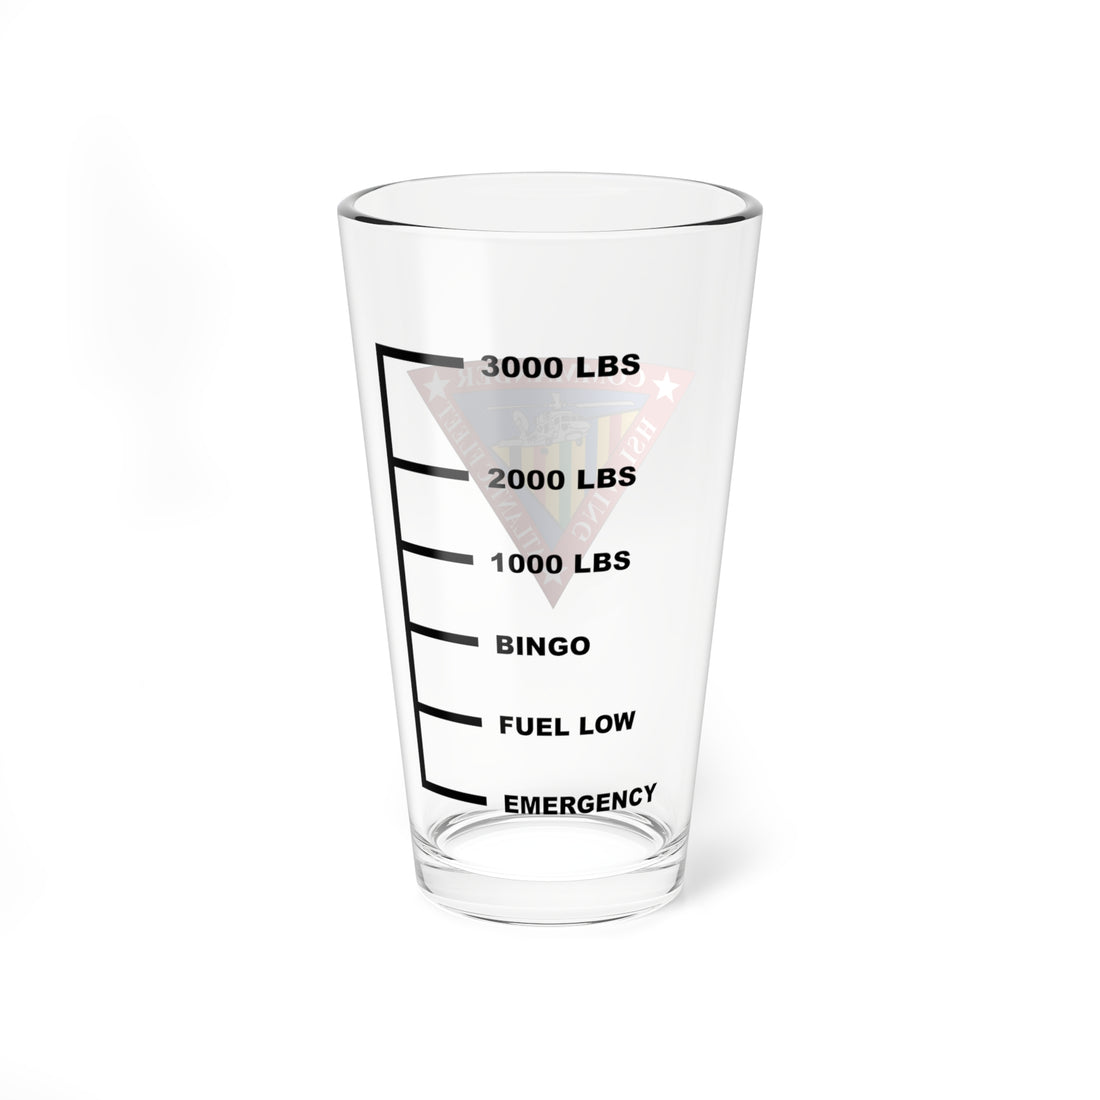 COMHSLWINGLANT Fuel Low Pint Glass, Navy Atlantic Helicopter ASW based in Jacksonville Florida